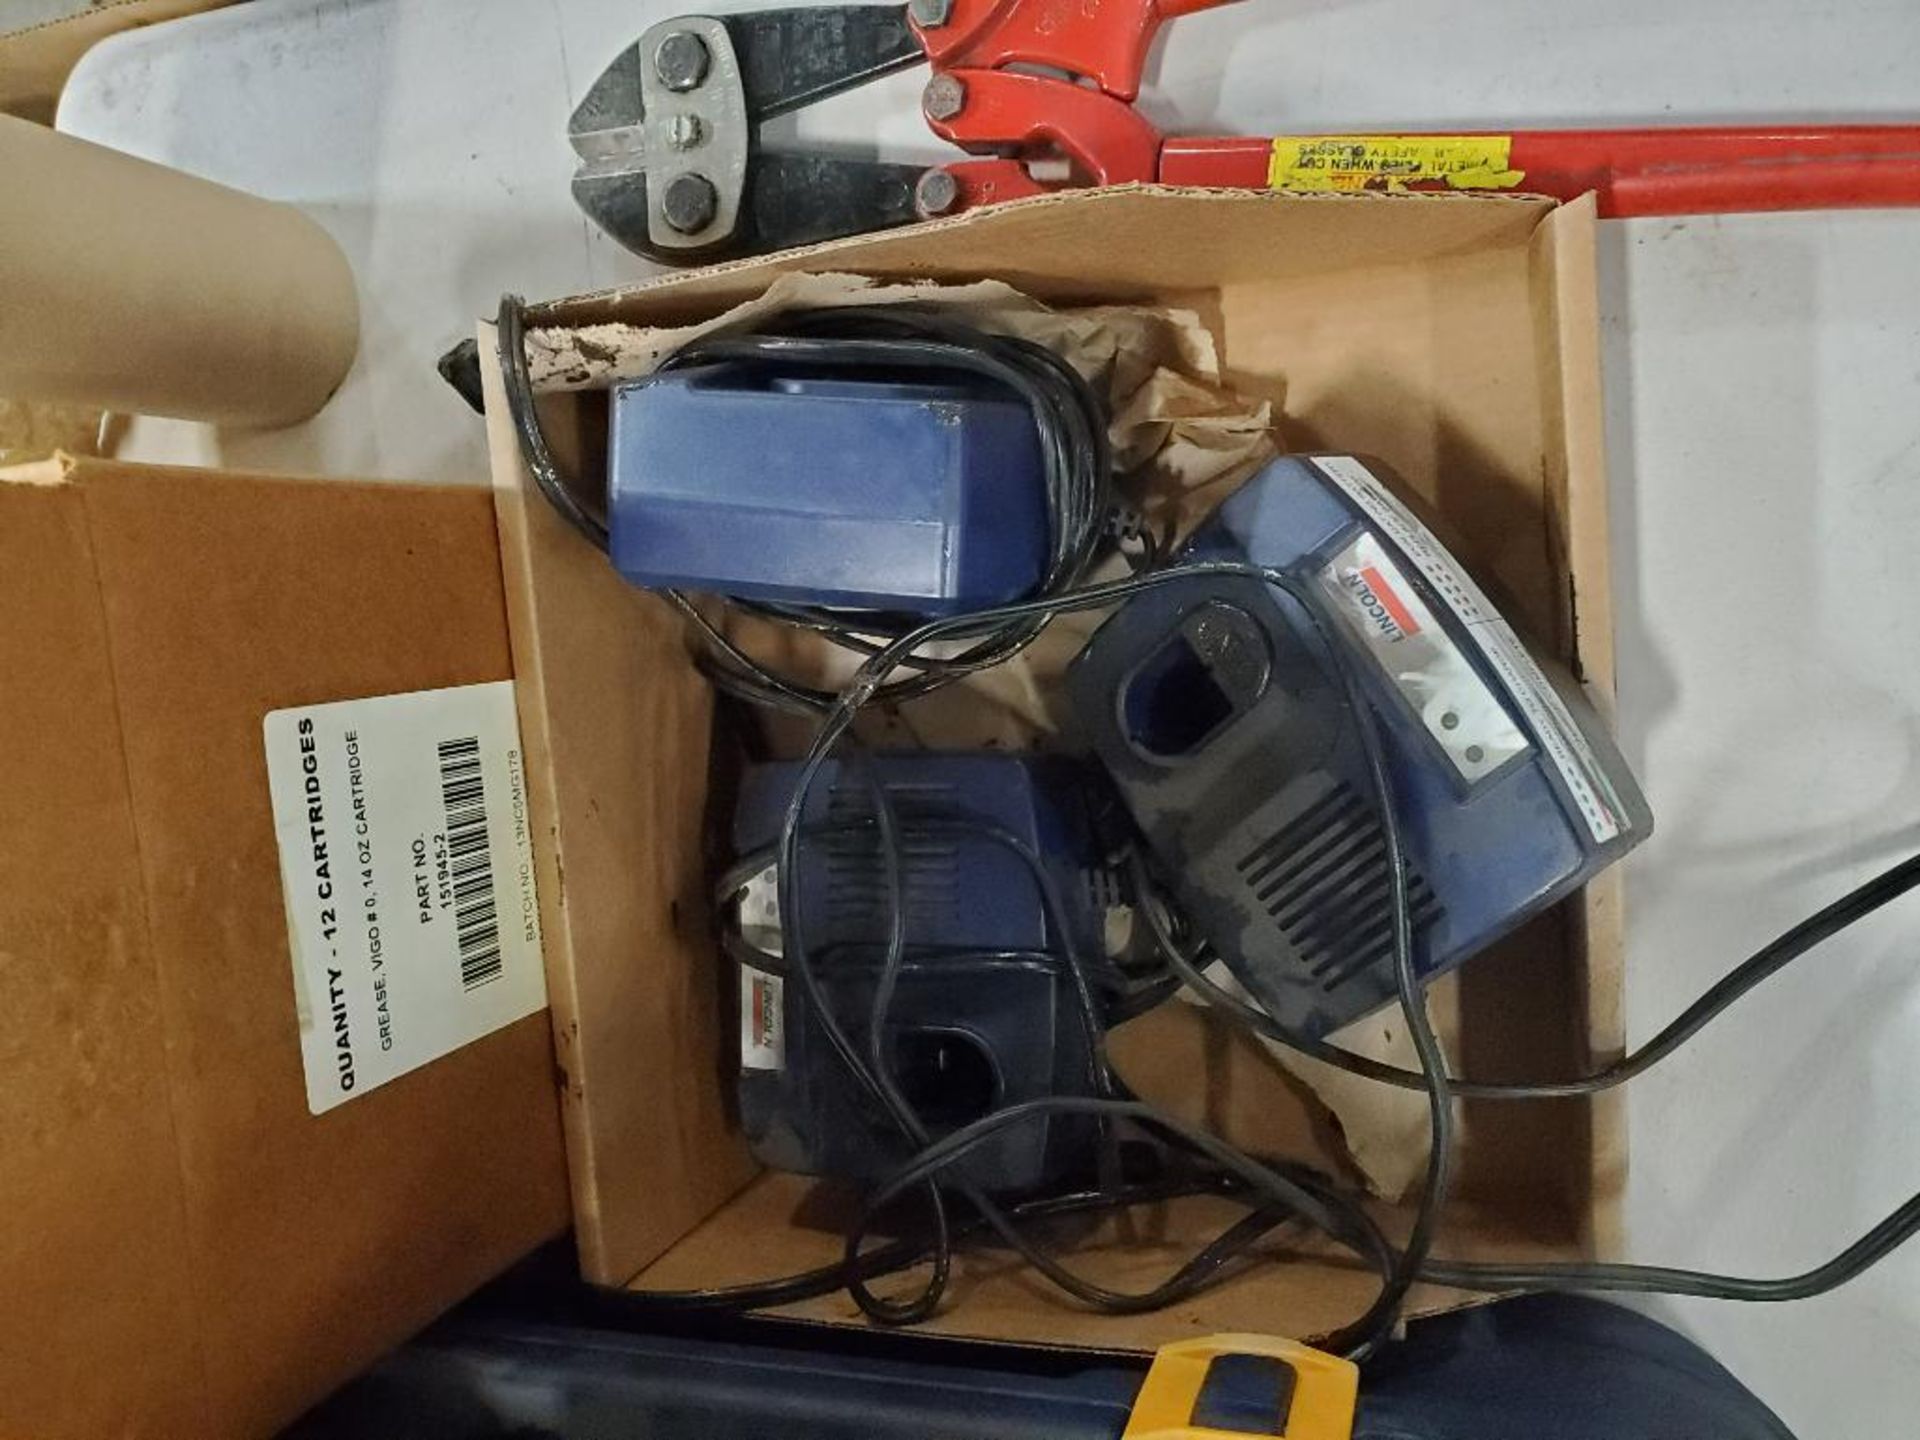 Assorted electrical power supply, cords, chargers, hand tool cutter, hand held scanners. - Image 8 of 17